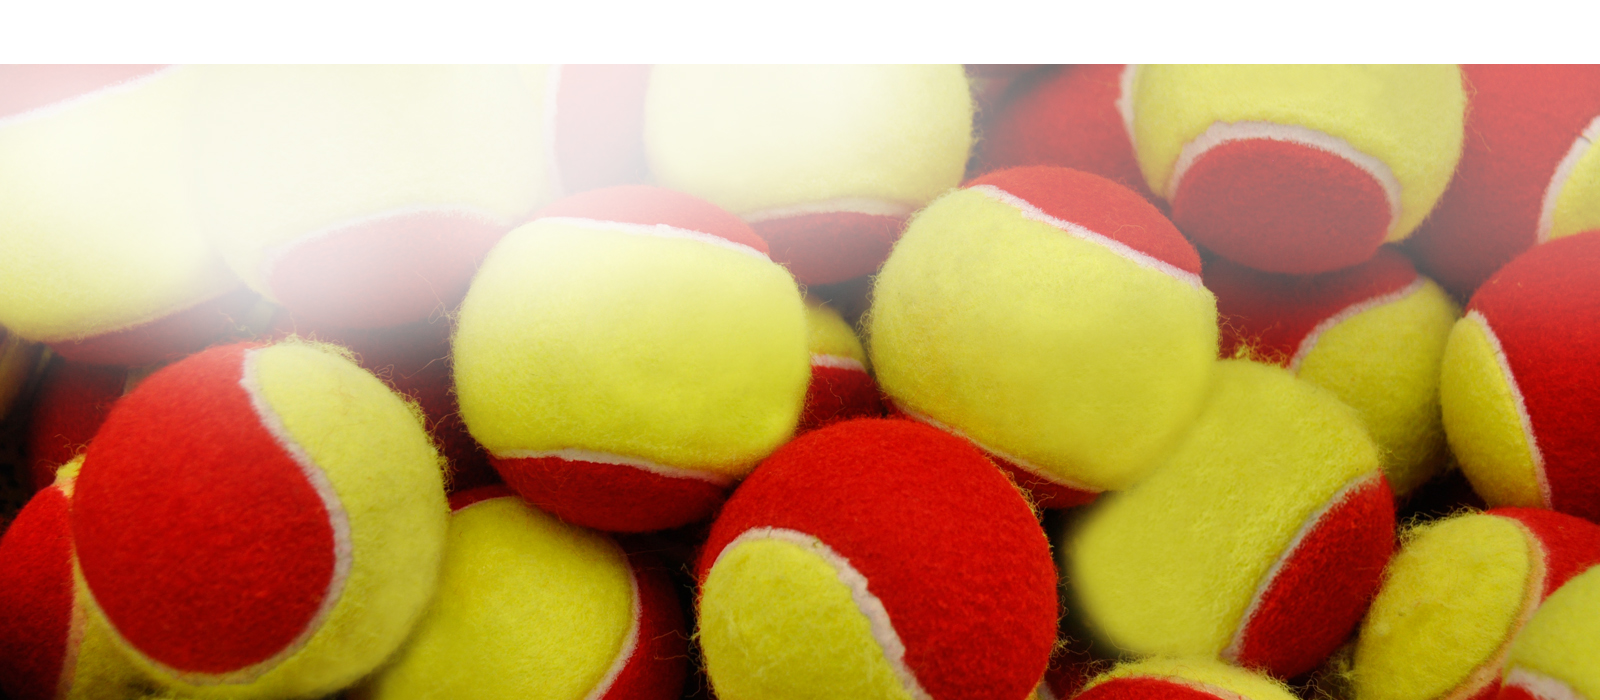 yellow and red tennis balls stacked on top of each other